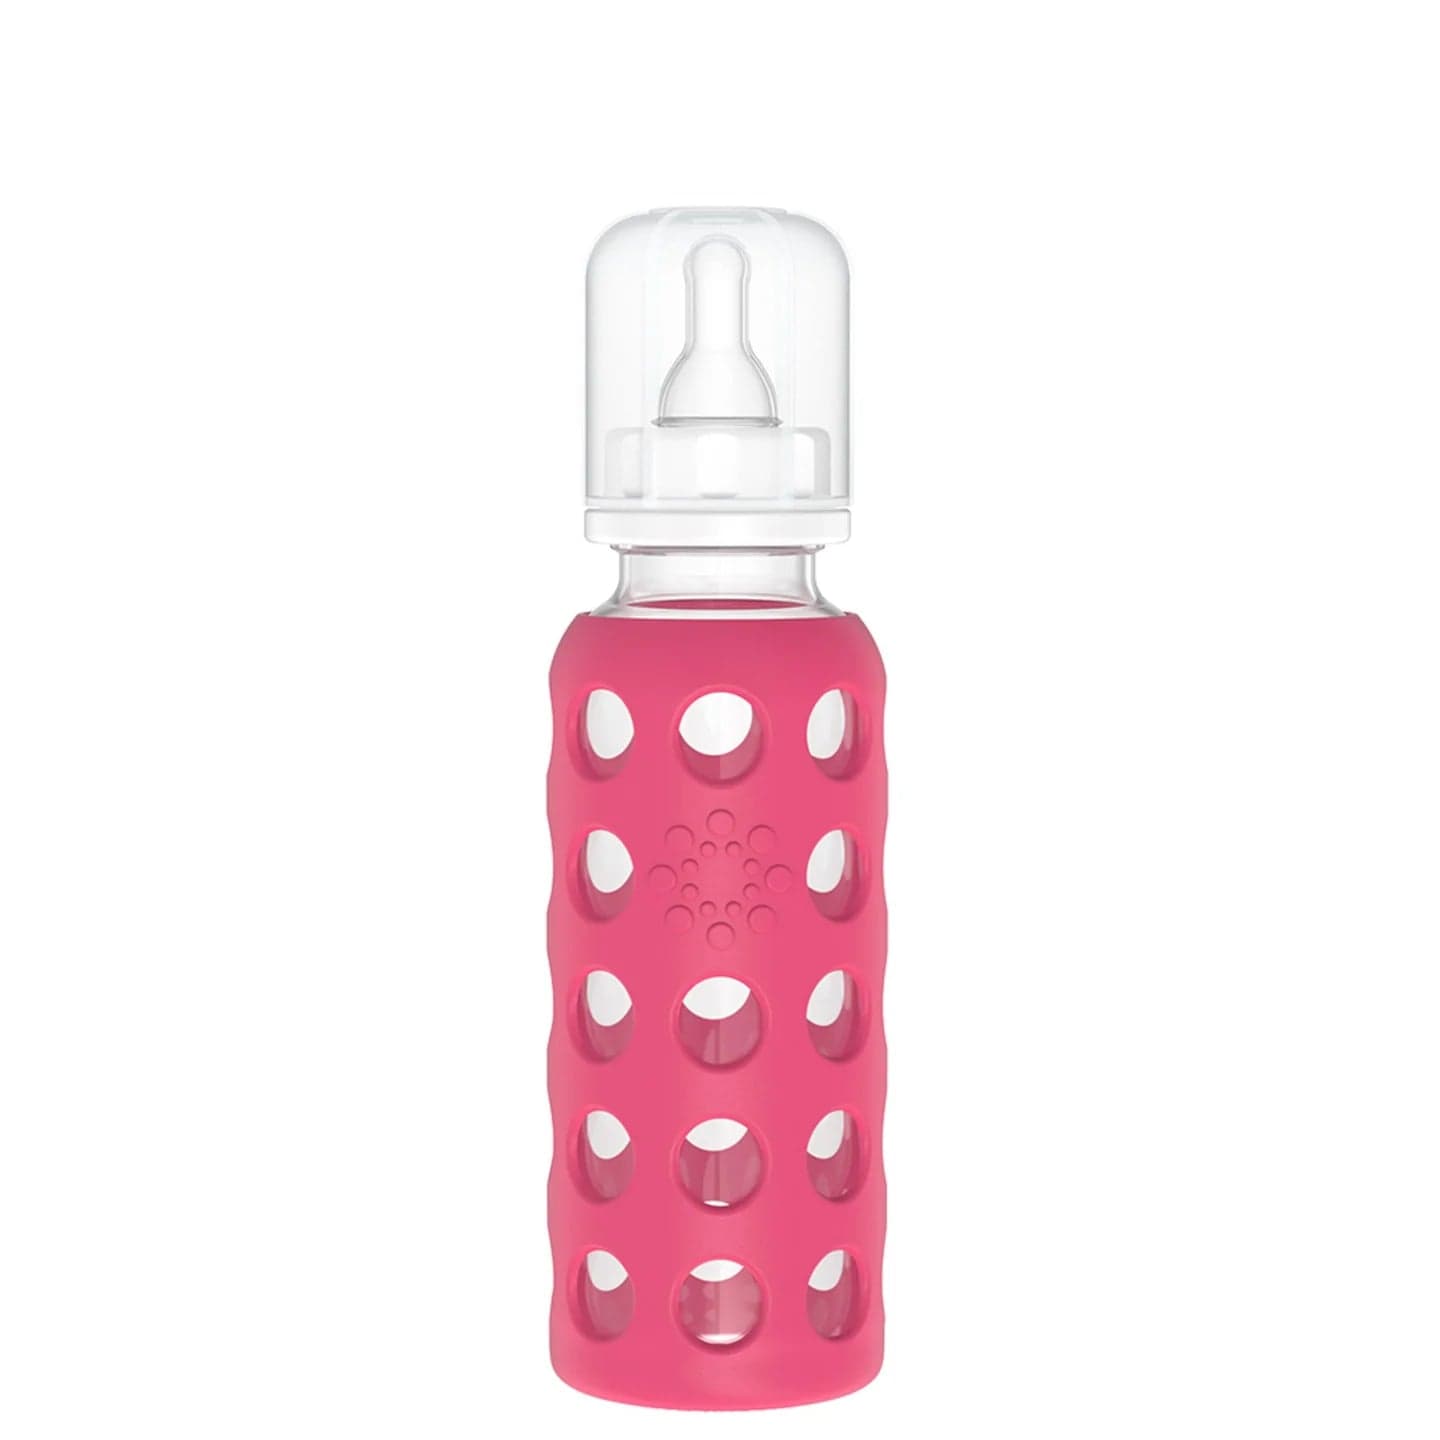 Lifefactory Soother (Raspberry) Lifefactory 9oz Glass Baby Bottle - Stage 2 Nipple, Stopper, and Cap (Raspberry)